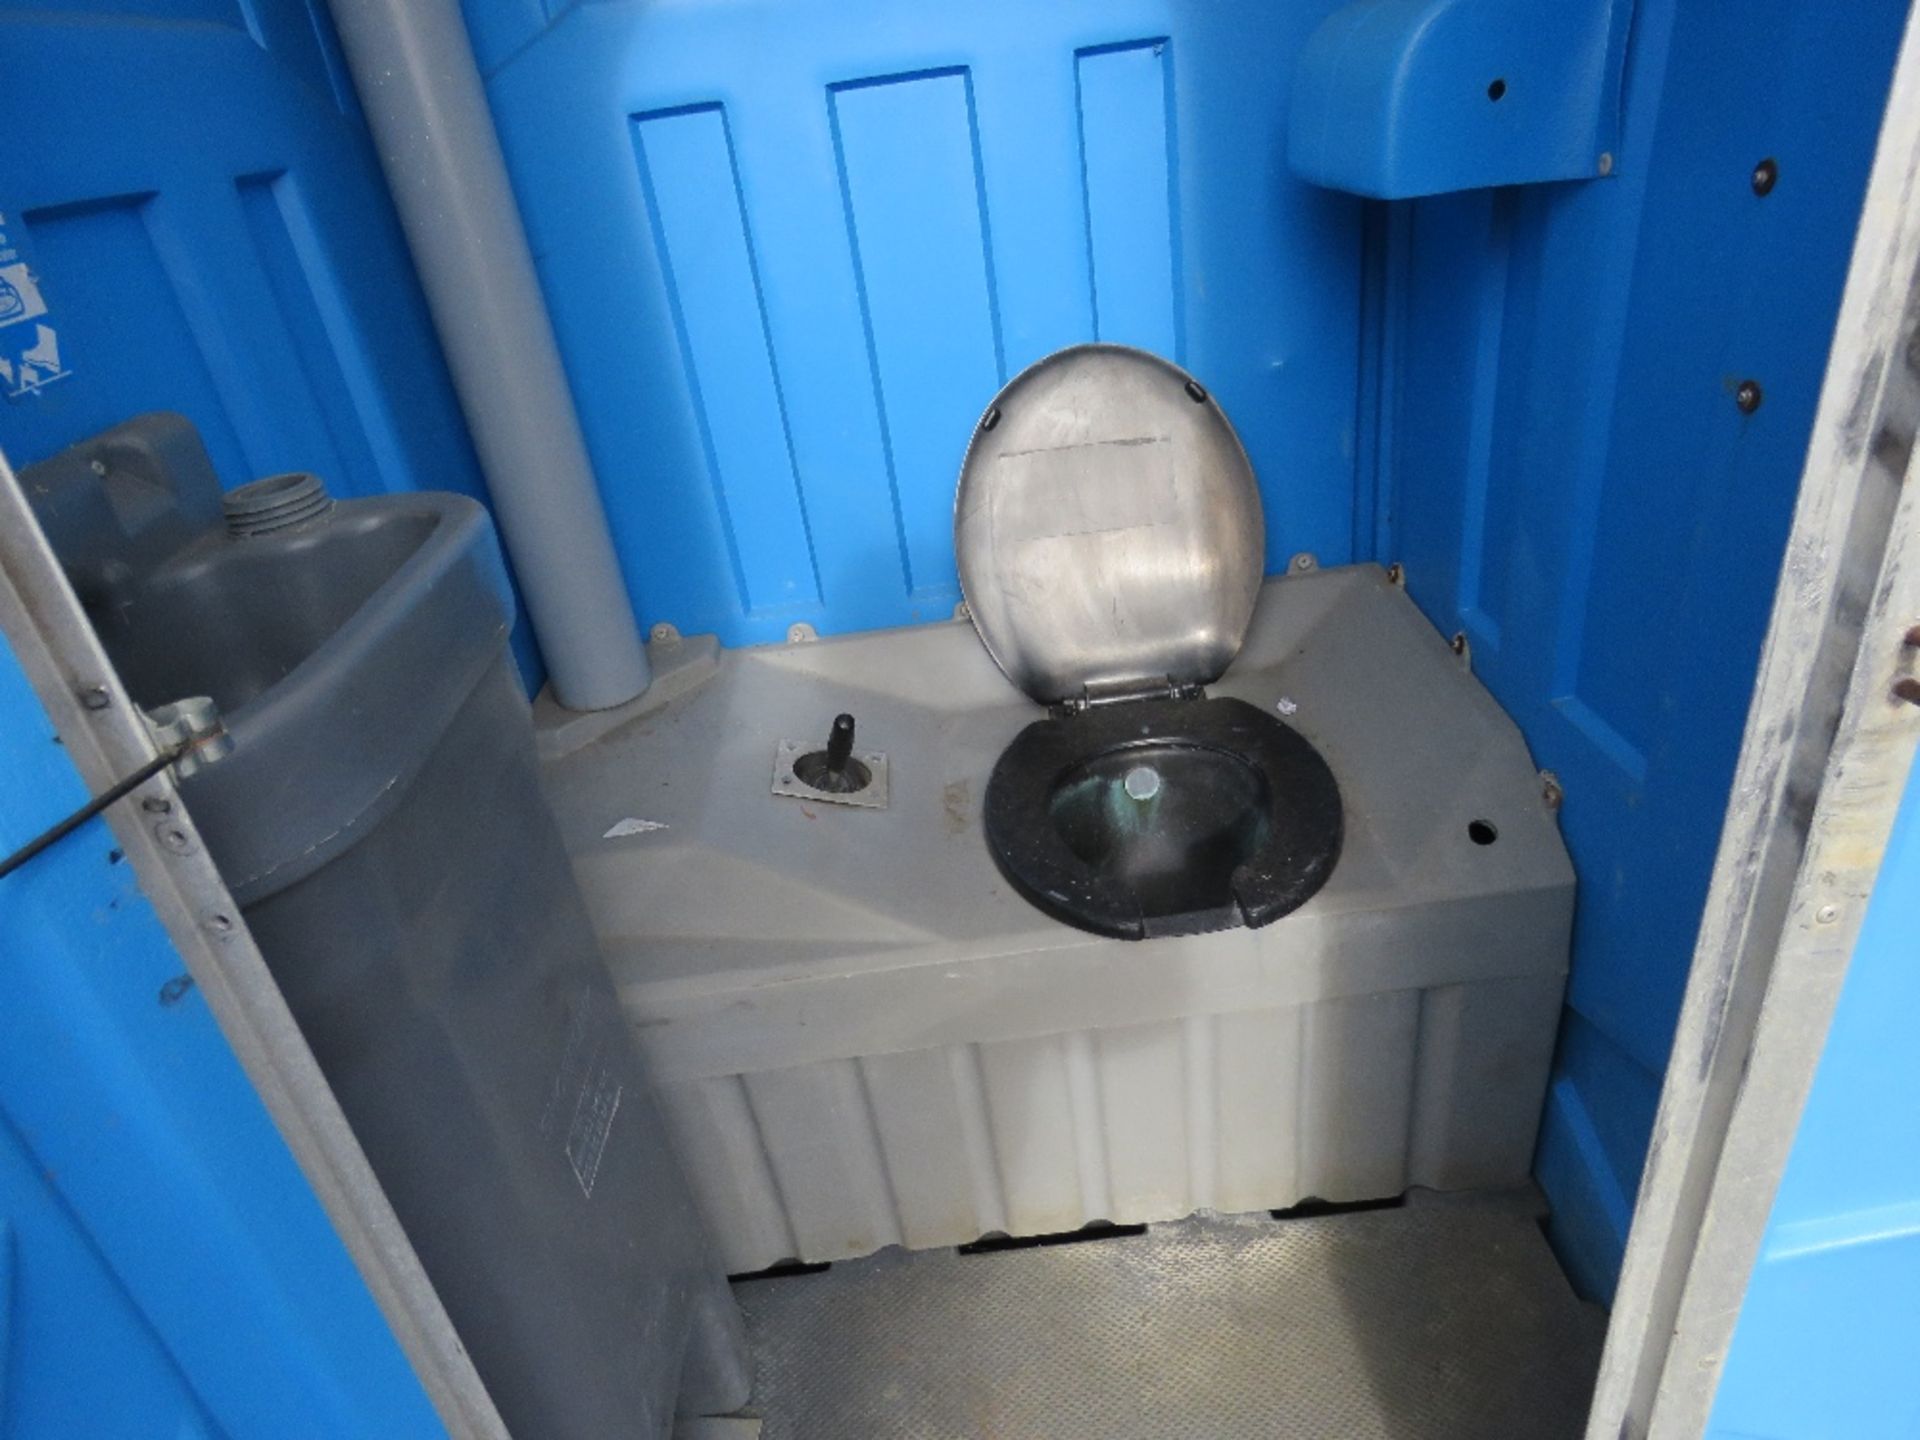 Portable site toilet - Image 2 of 3